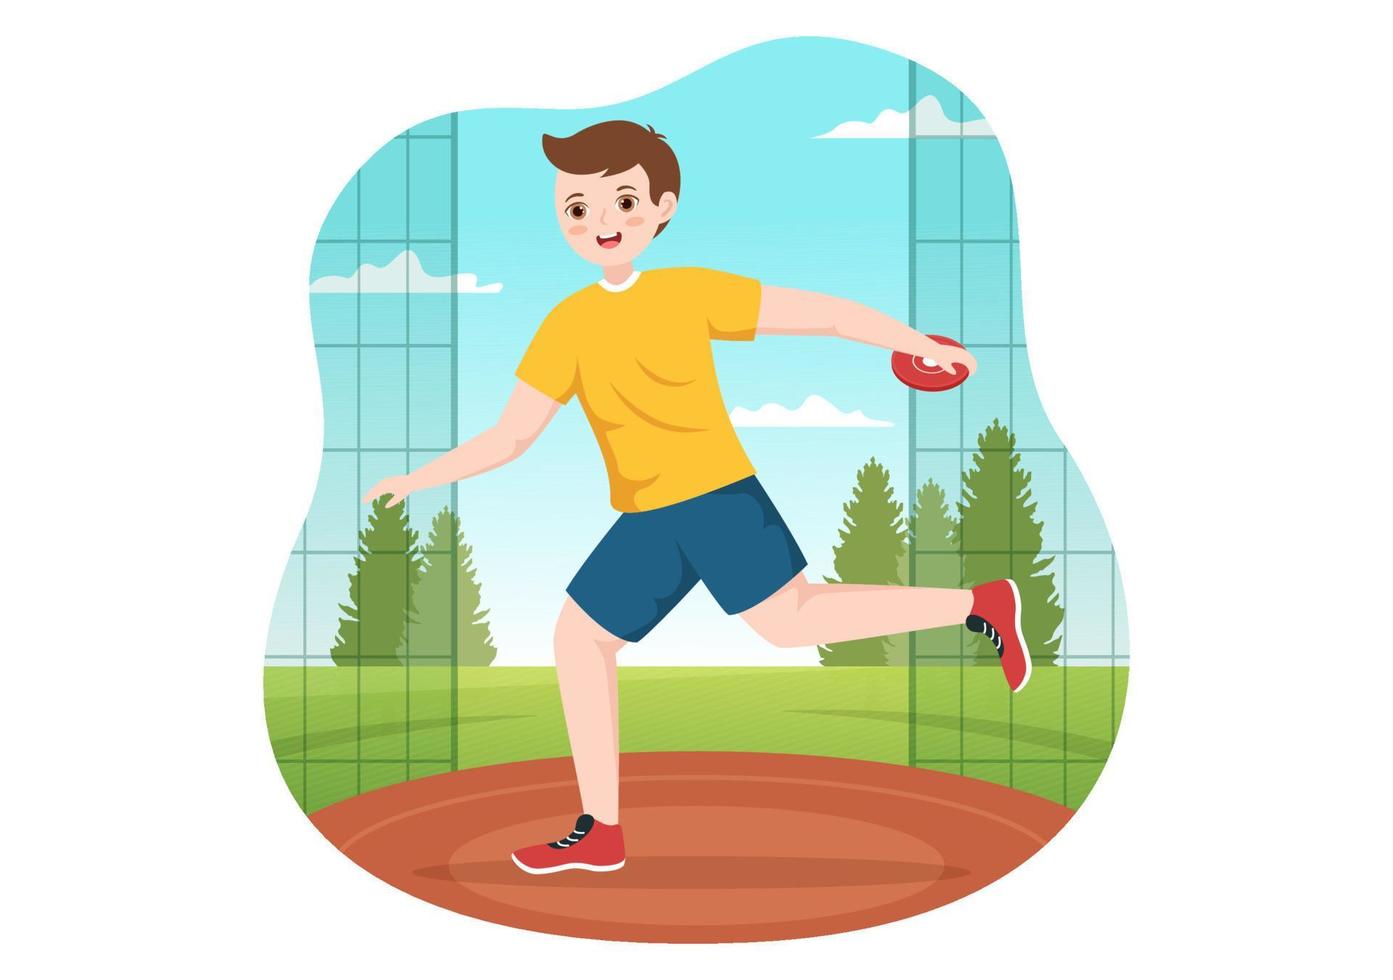 Discus Throw Playing Athletics Illustration with Throwing a Wooden Plate in Sports Championship Flat Cartoon Hand Drawn Templates vector